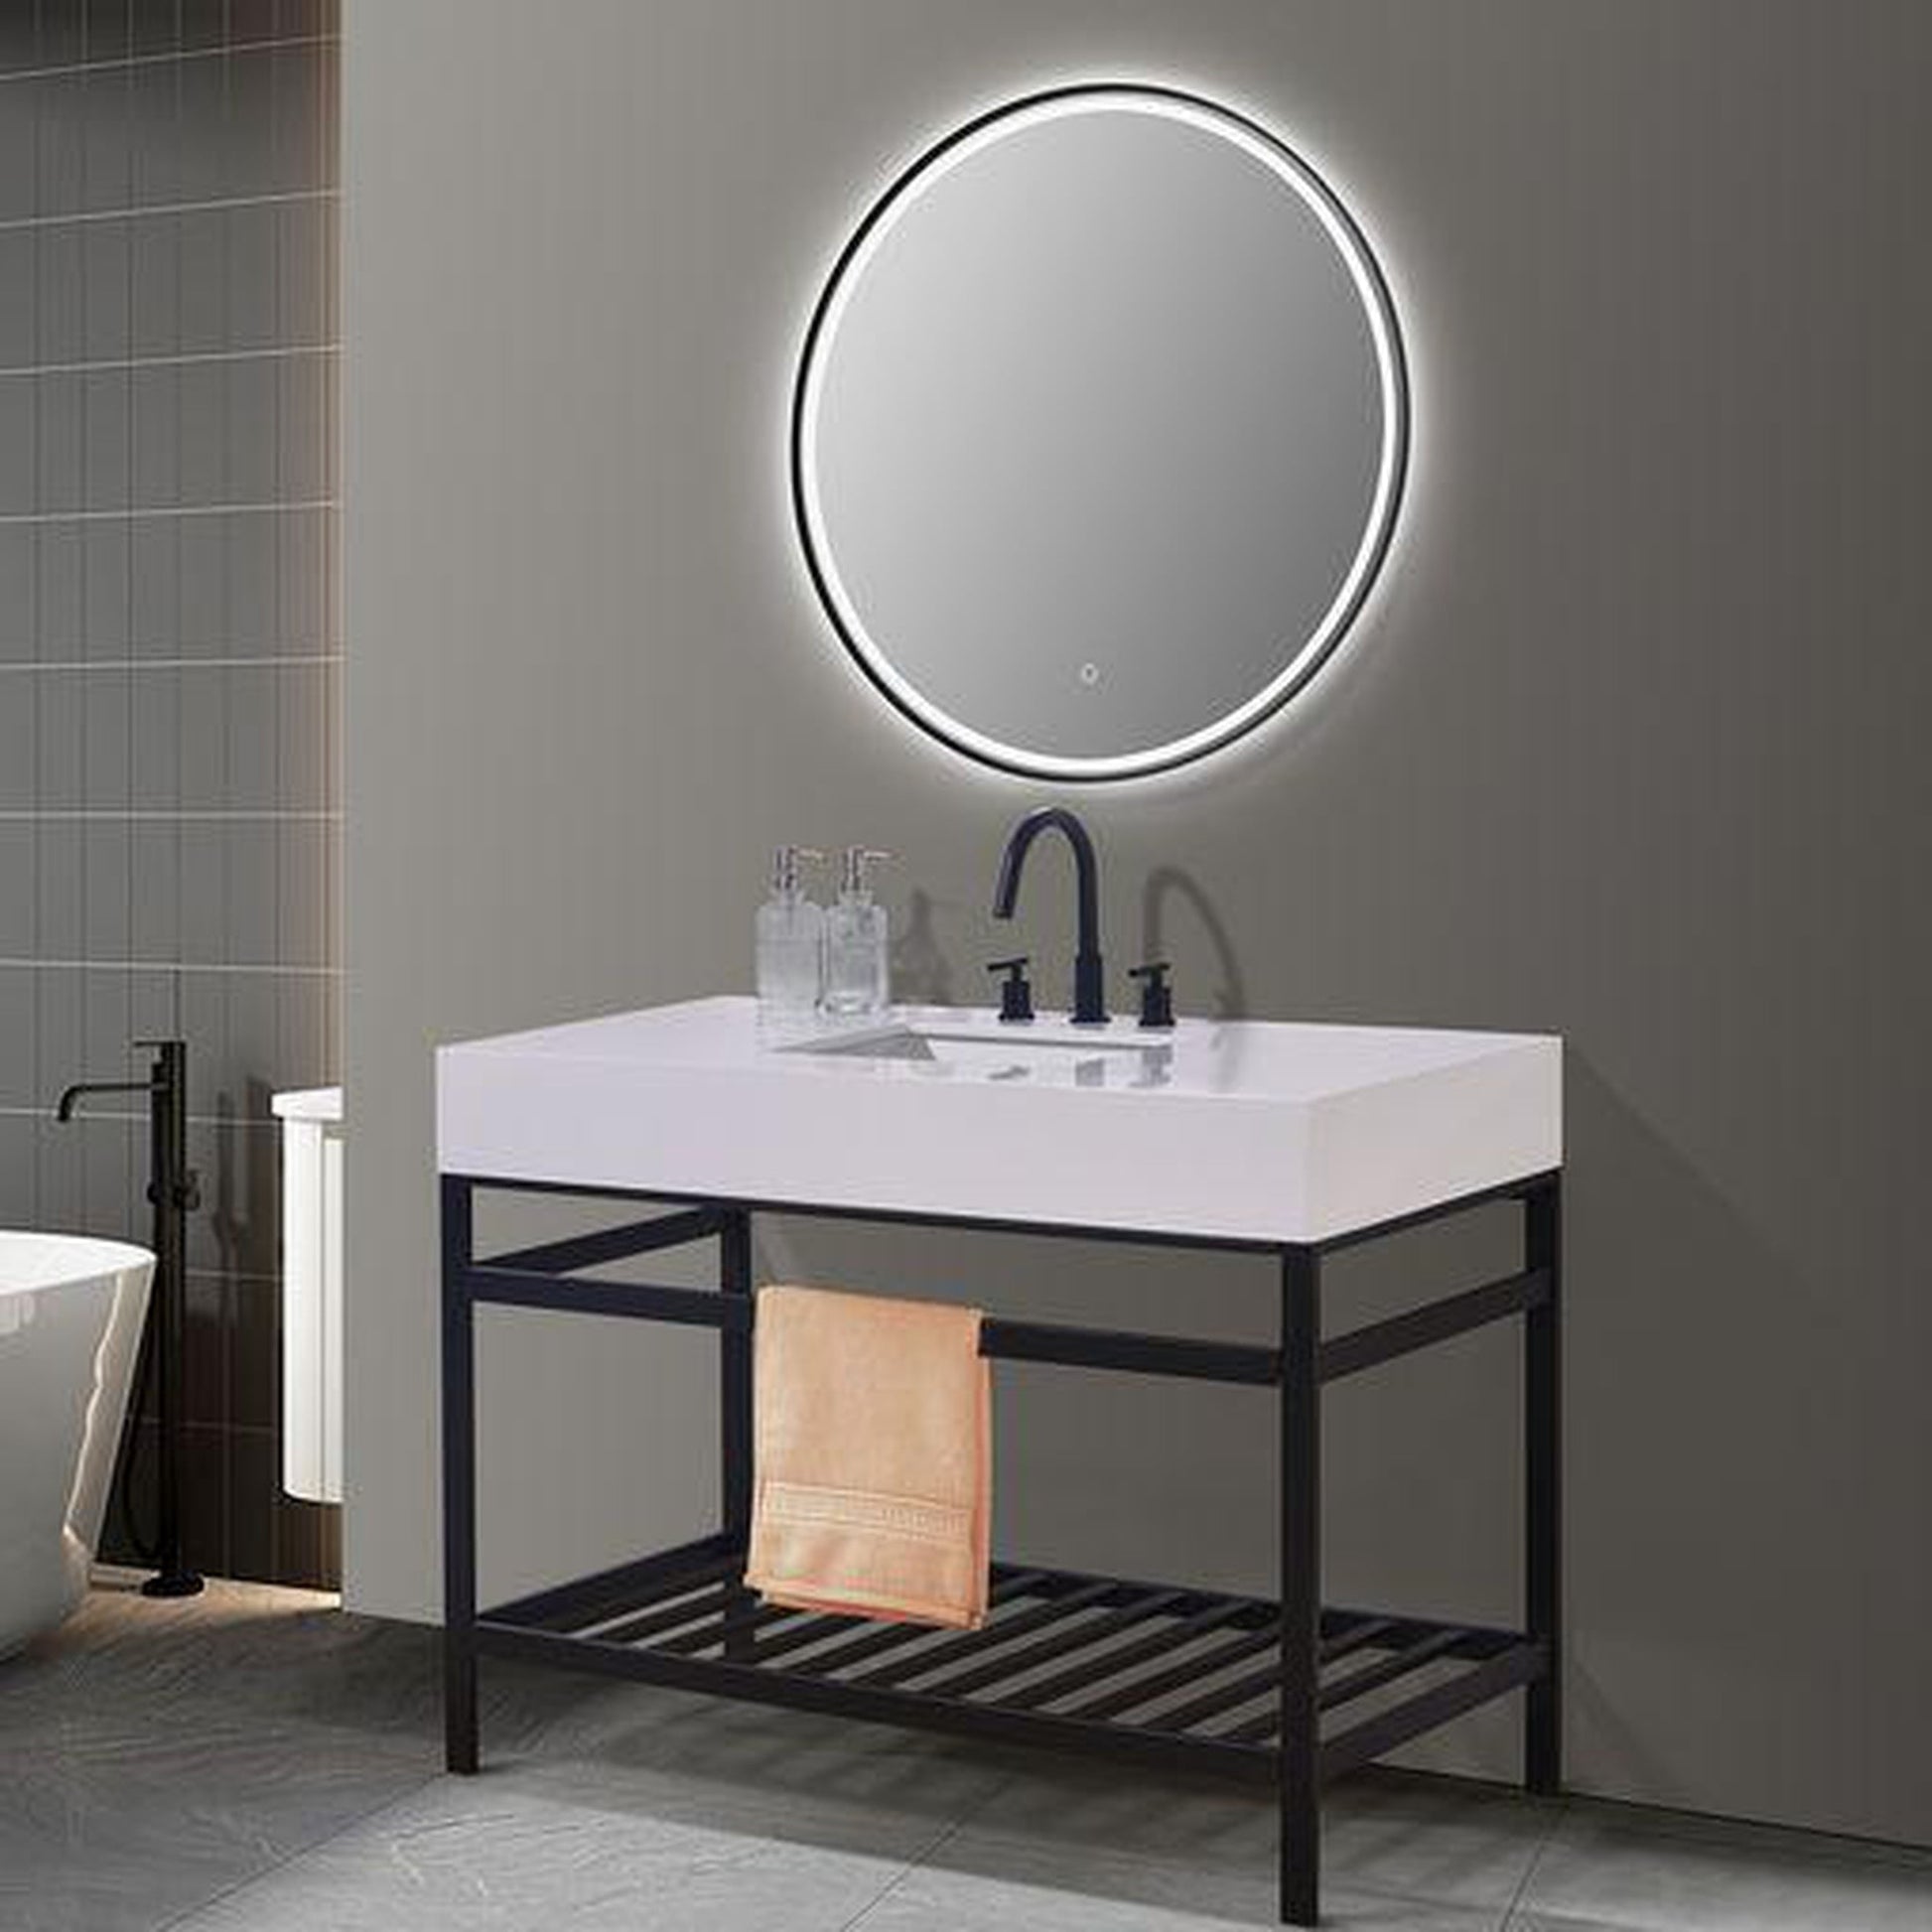 Altair Edolo 48" Matte Black Single Stainless Steel Bathroom Vanity Set Console With Mirror, Snow White Stone Top, Single Rectangular Undermount Ceramic Sink, and Safety Overflow Hole